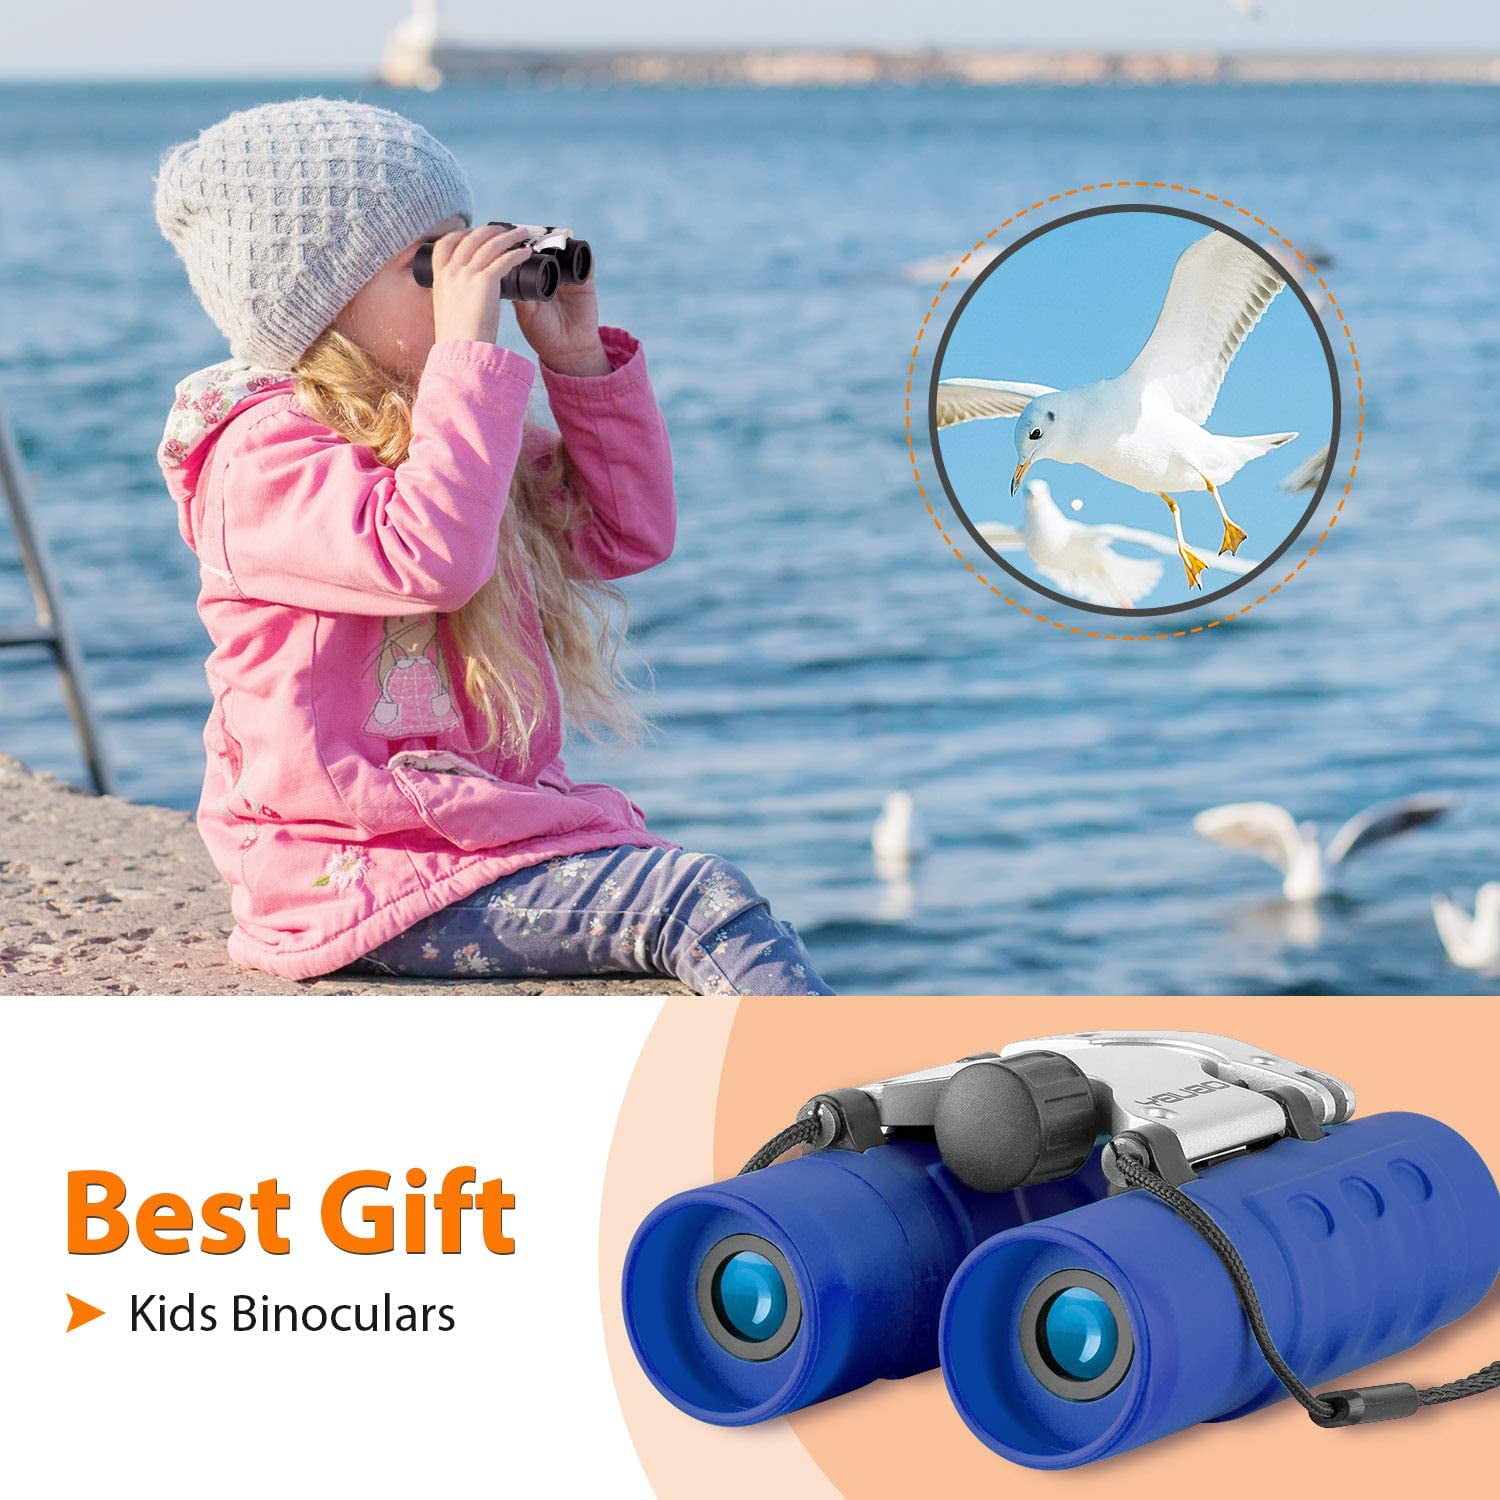 Sports Events and Safari Park Hunting Exploration Gifts for 3-12 Year Boys Girls Compact Kids Binoculars 8x21 High-Resolution for Bird Watching Pink Binoculars for Kids Camping Hiking